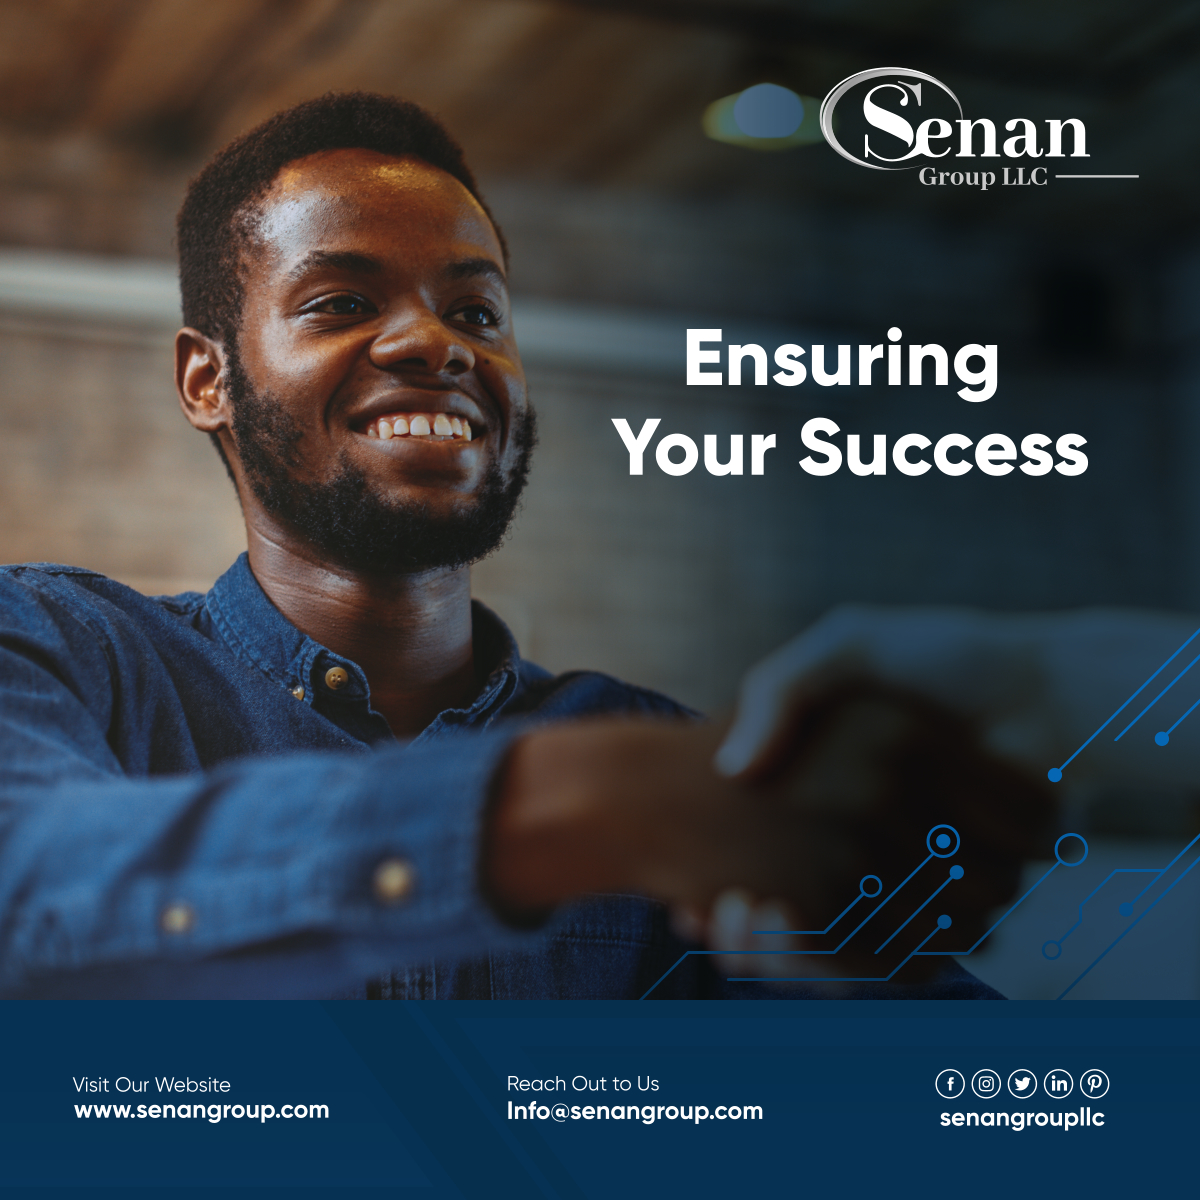 We understand how passionate business owners are to achieve success in their business. That is why we are here to help. We help ensure the business and technological success of every company through our exceptional services.

#TechnologicalSuccess #ExceptionalServices